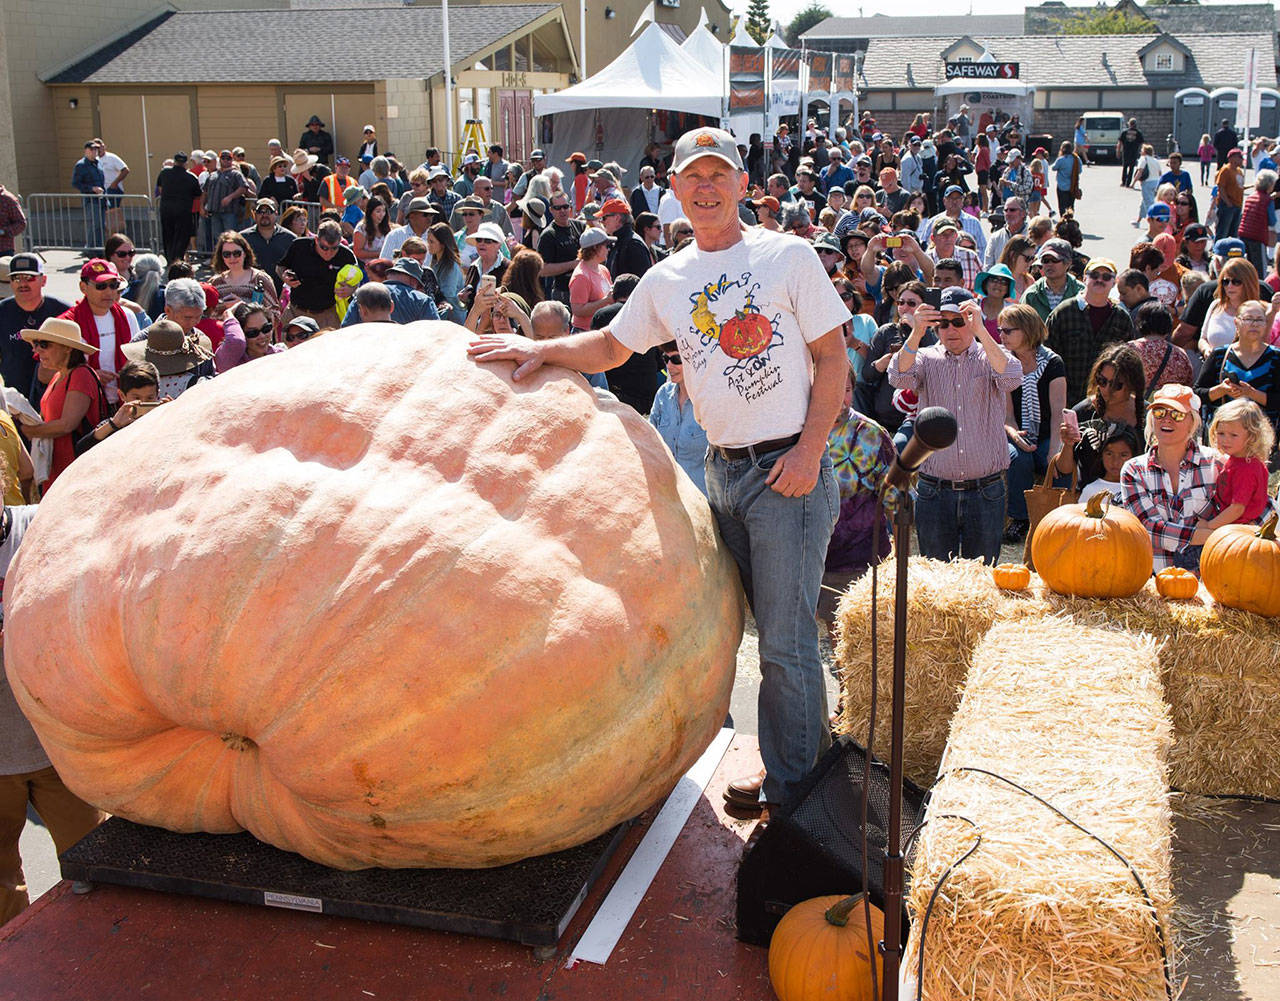 Joel Holland with his 2,323 pound Atlantic Giant pumpkin. Photo by Half Moon Bay Festival